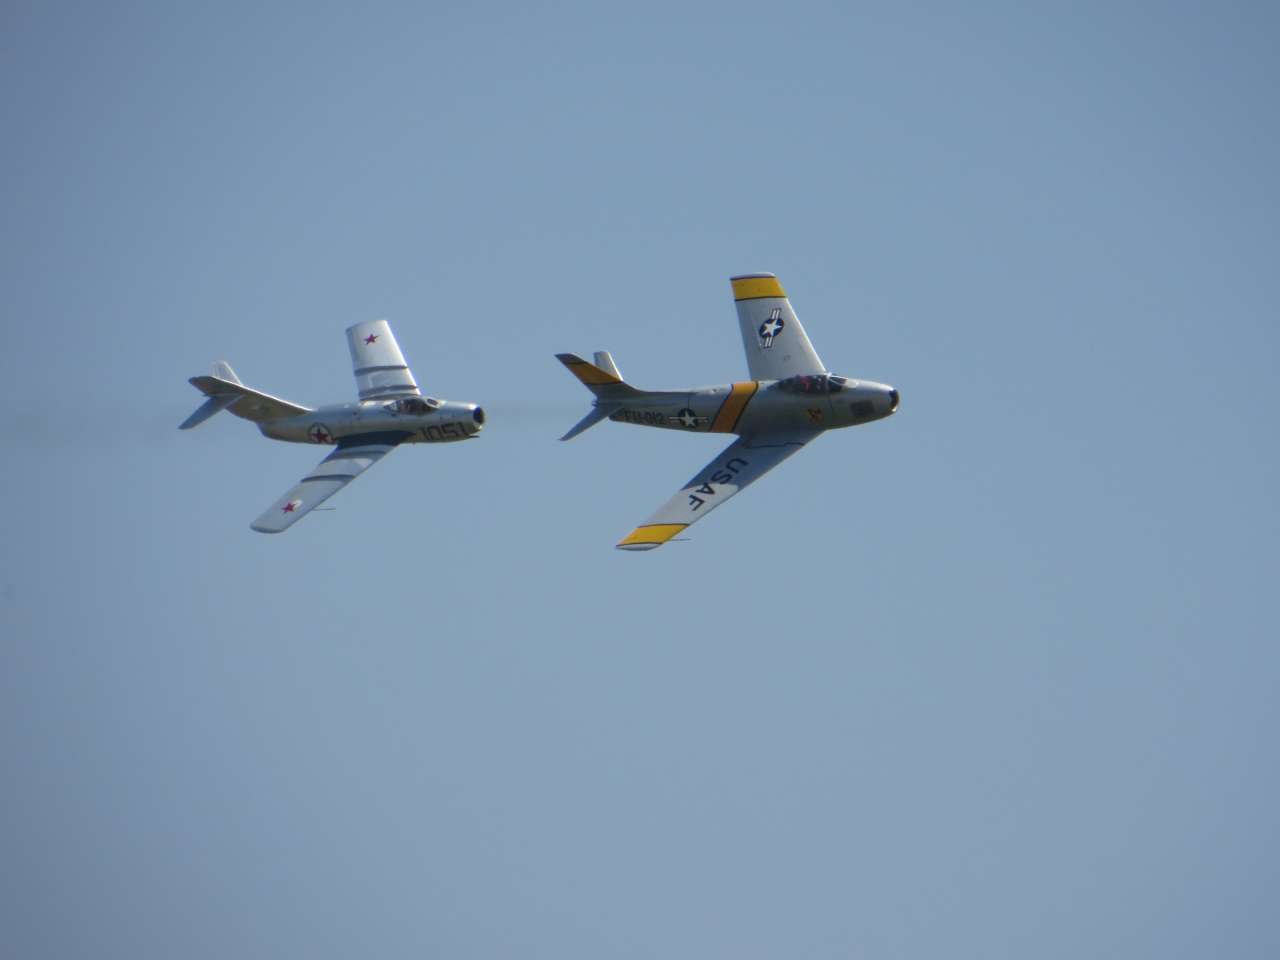 Mig-15 and F-86